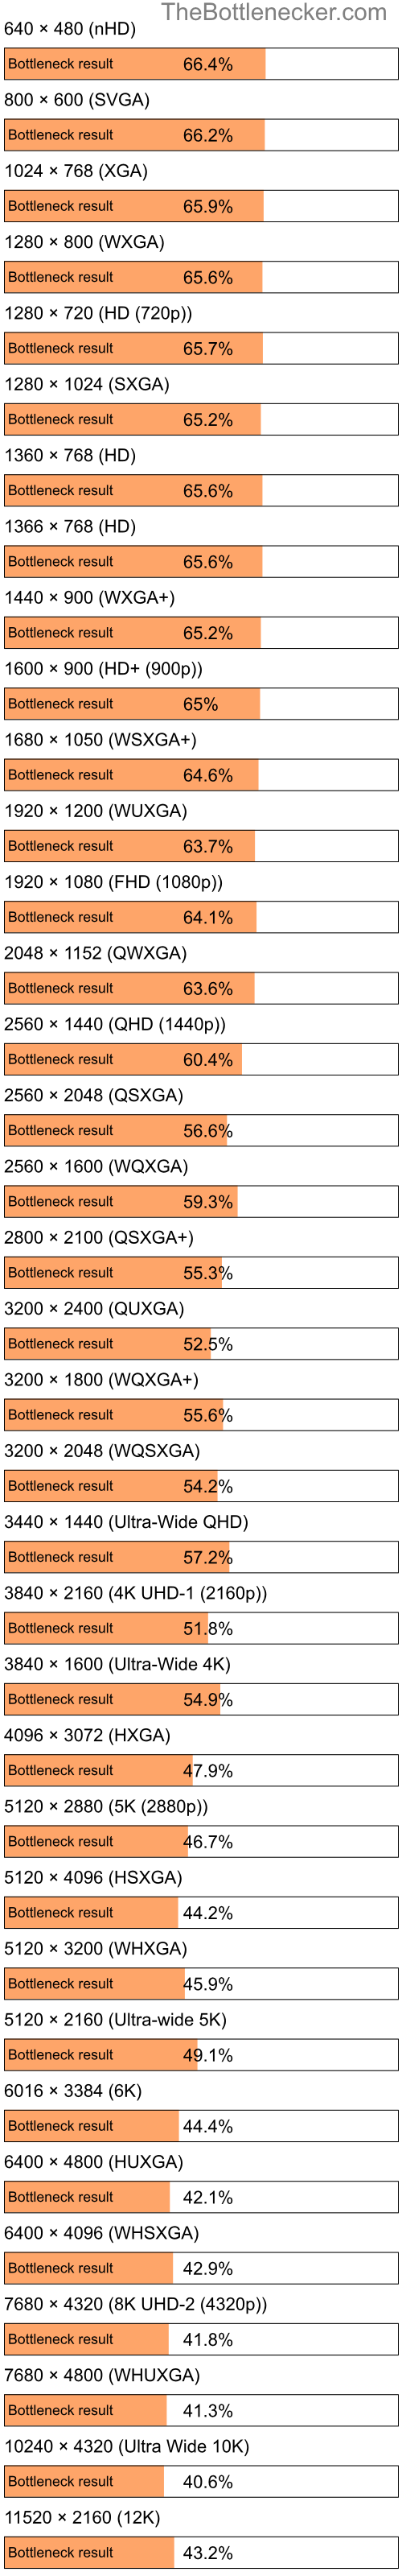 Bottleneck results by resolution for AMD Phenom II X6 1035T and NVIDIA GeForce RTX 3060 Ti in General Tasks